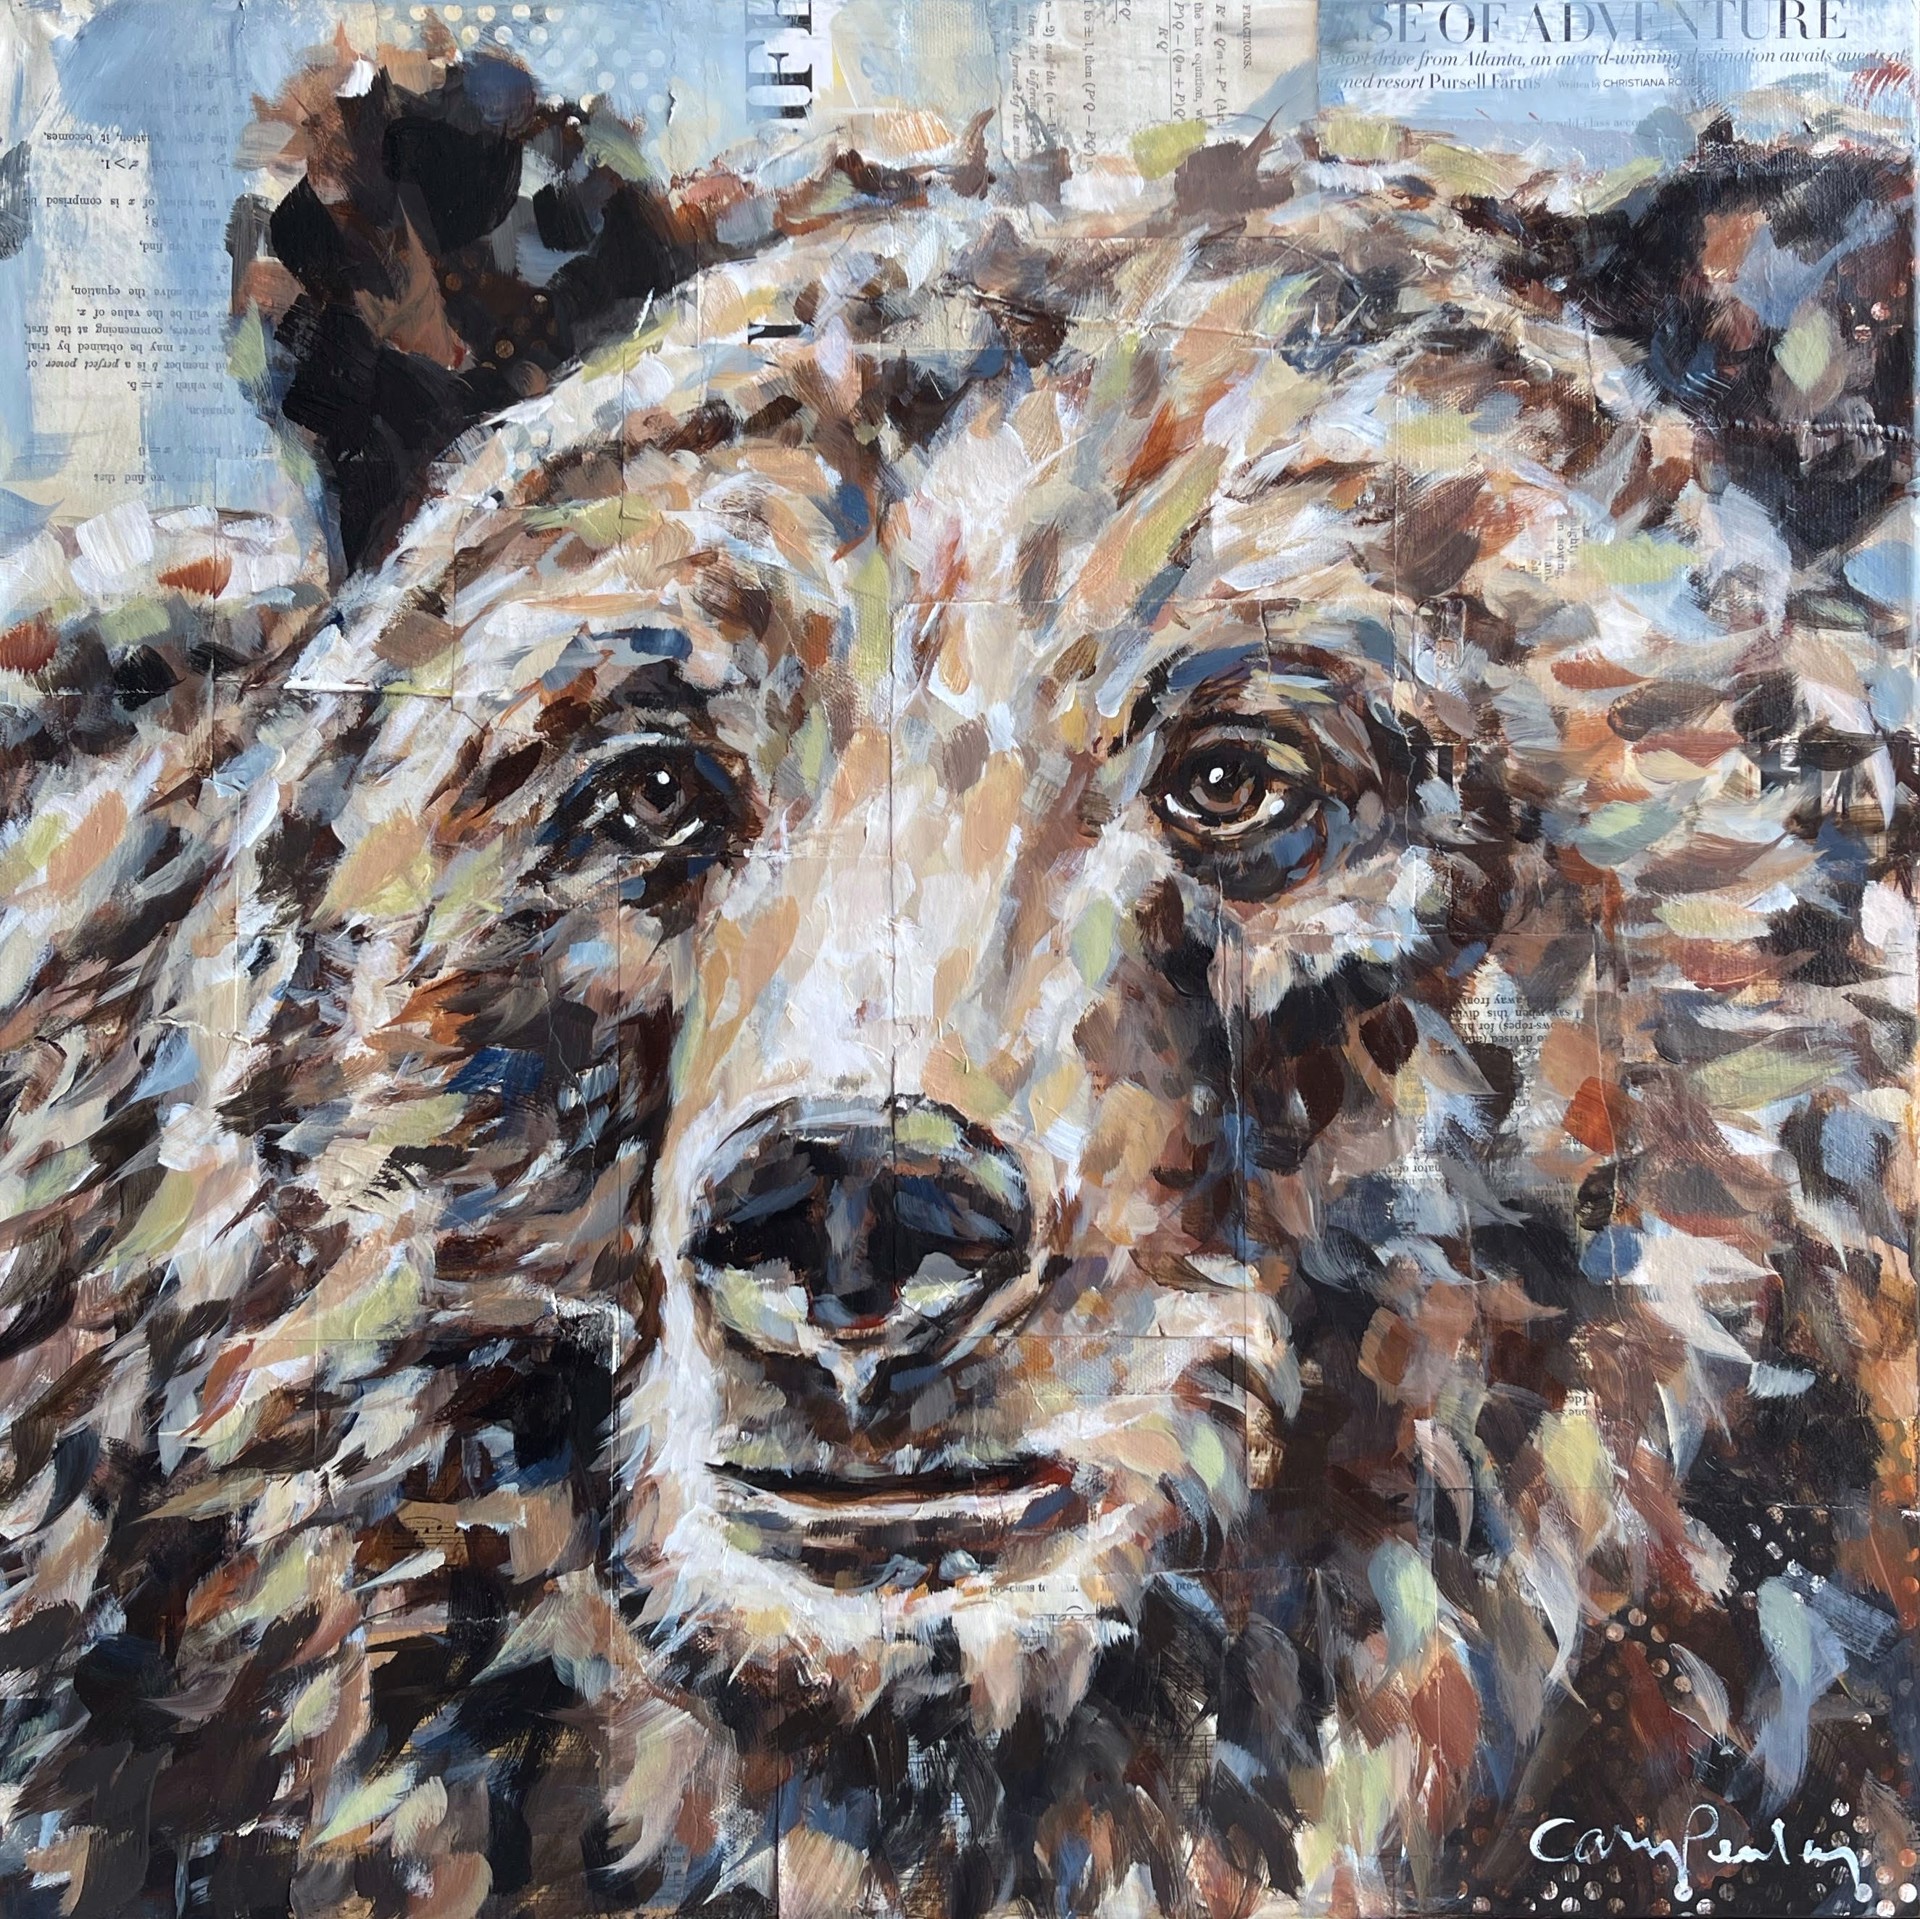 Original Artwork, Painting, Collage Of A Bear's Head, By Carrie Penley